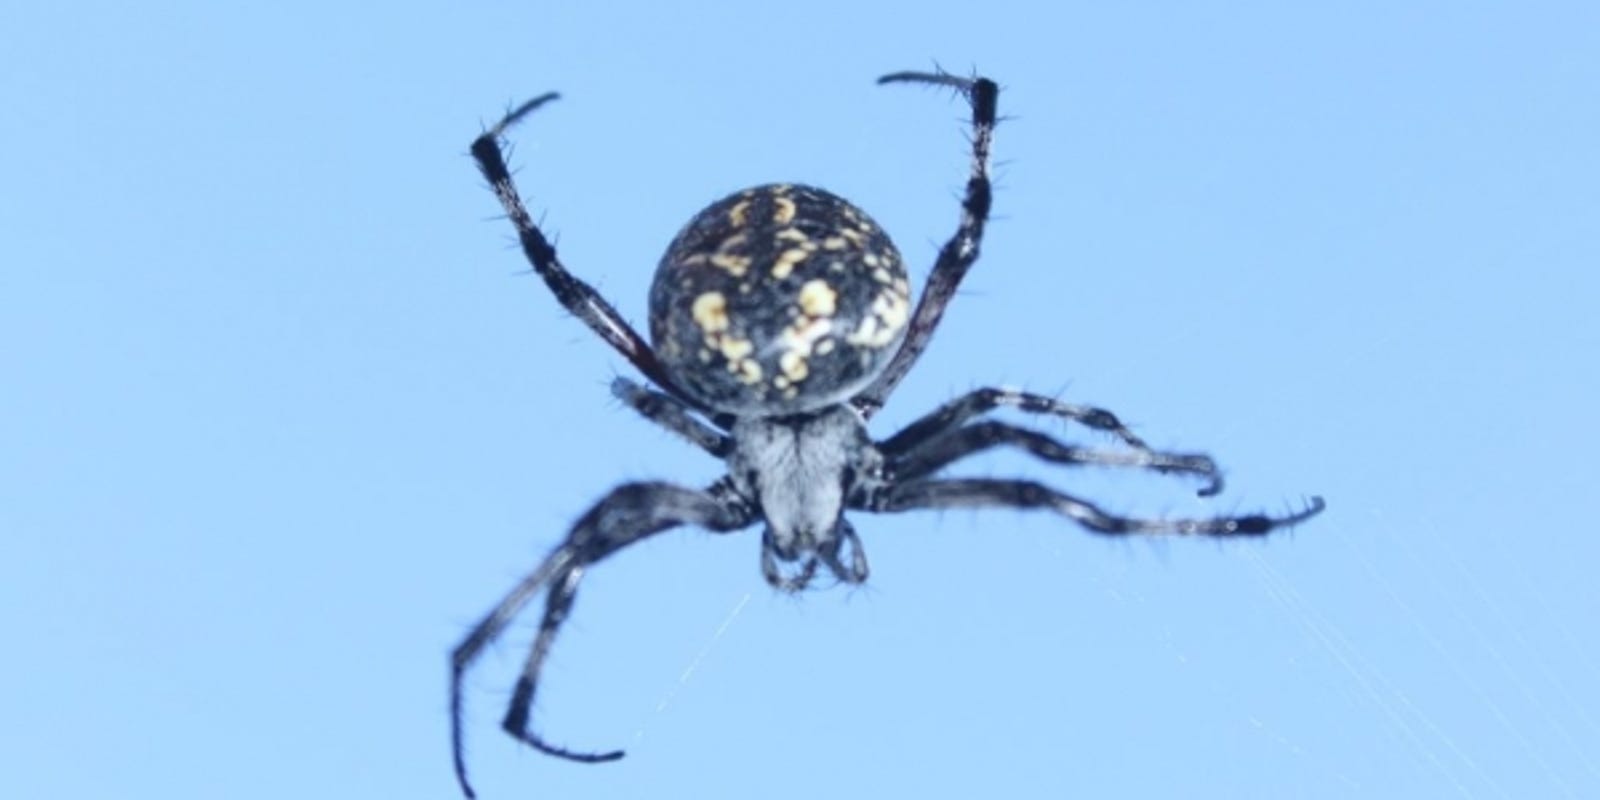 Wild About Texas The Humpbacked Orbweaver